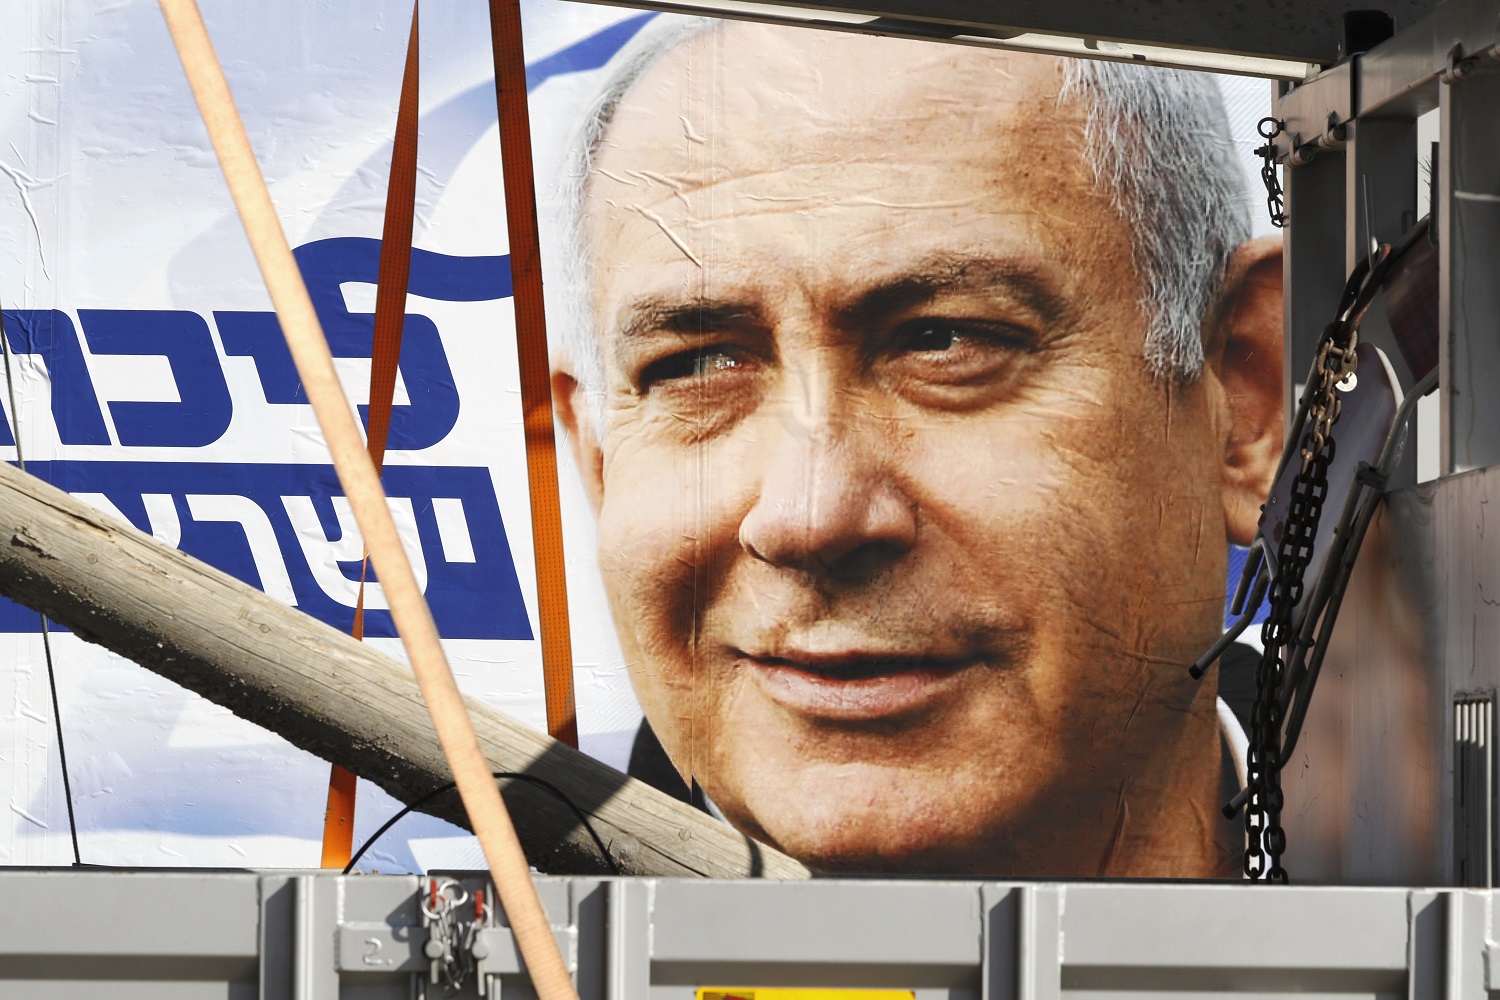 A youth walks past an election poster of  Benjamin Netanyahu, leader of the Likud party, in Tel Aviv, on 3 April 2019 (AFP)